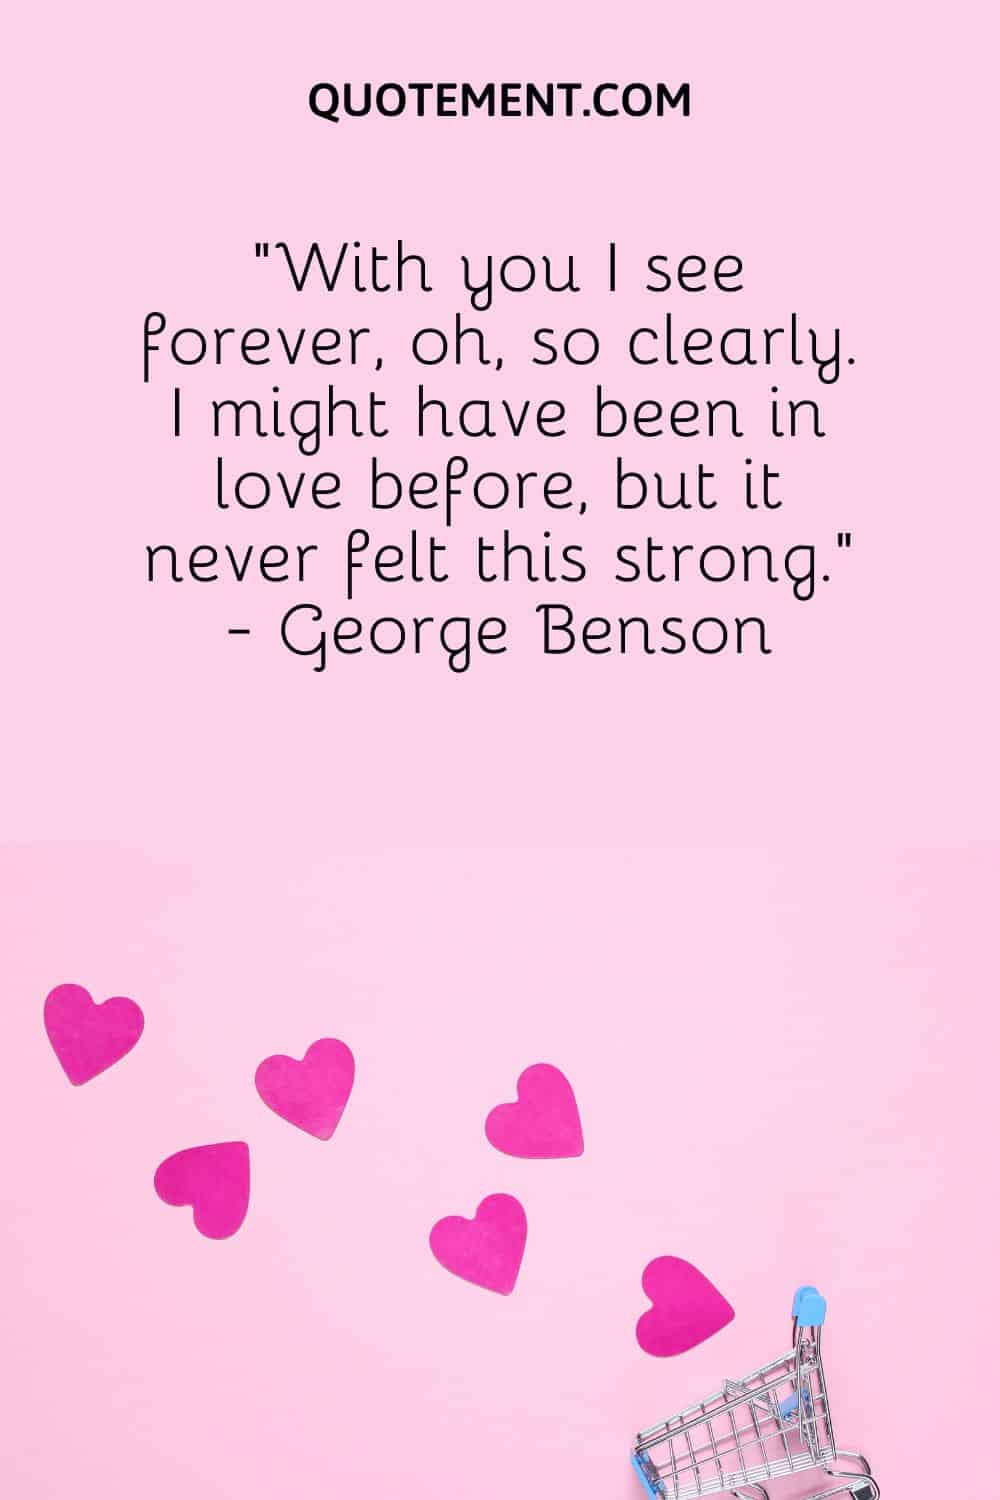 “With you I see forever, oh, so clearly. I might have been in love before, but it never felt this strong.” - George Benson